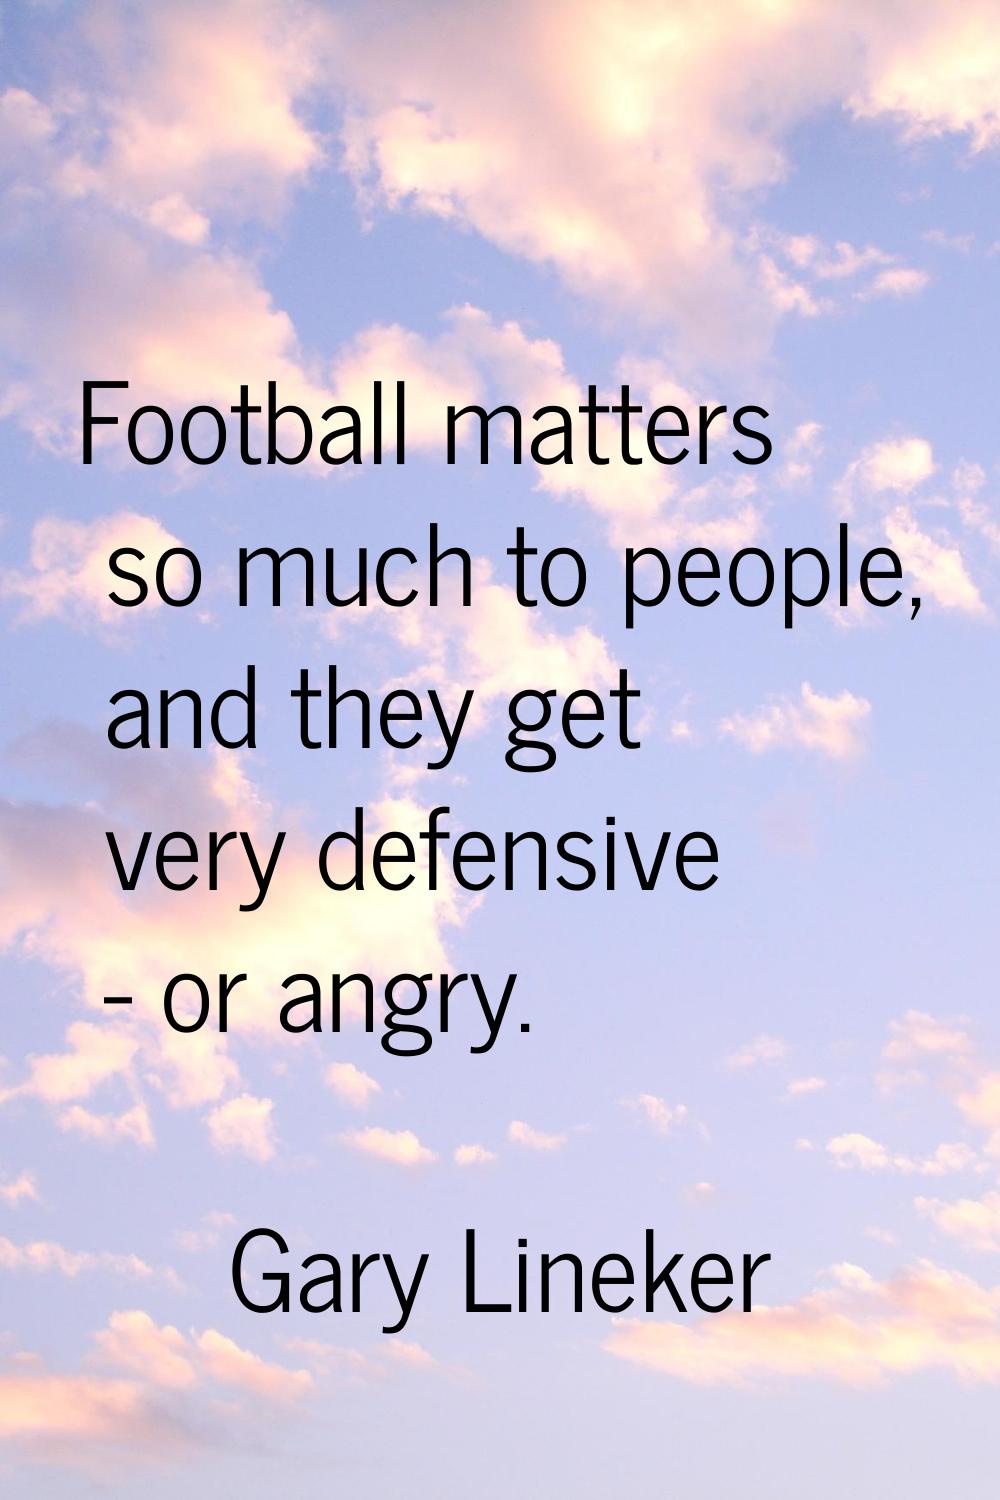 Football matters so much to people, and they get very defensive - or angry.